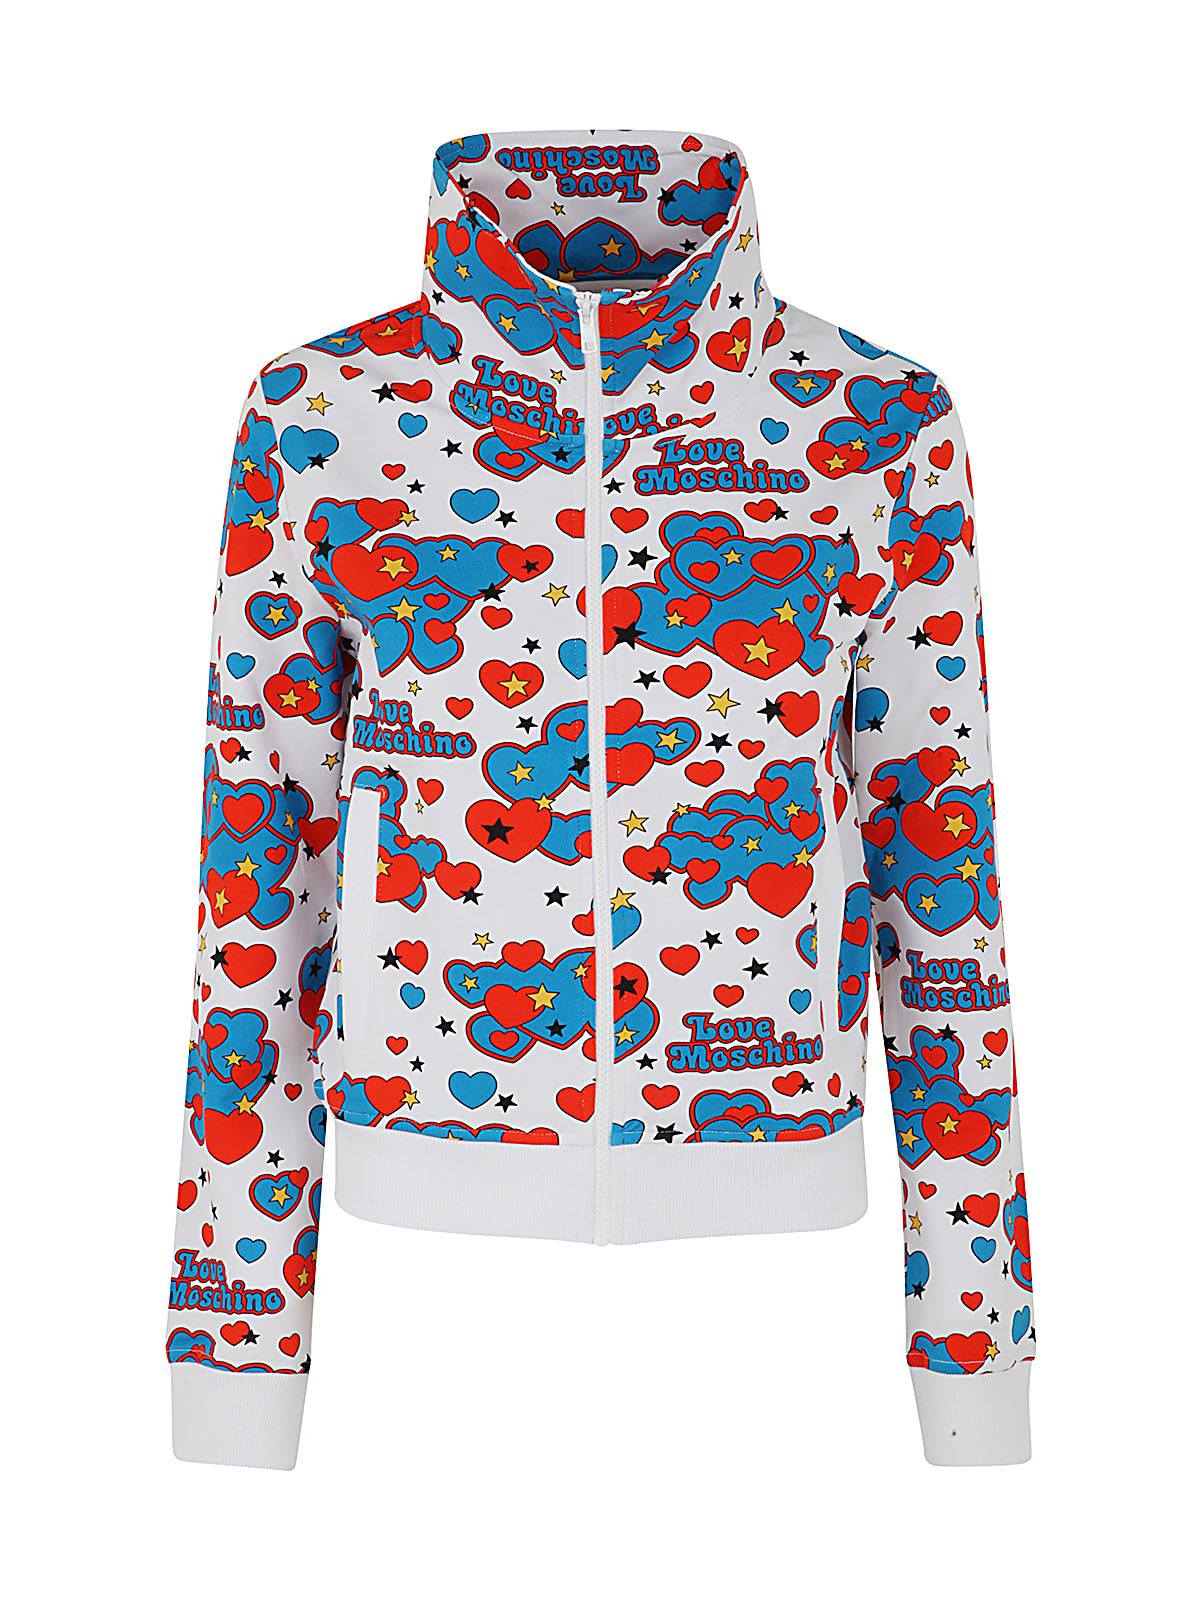 LOVE MOSCHINO HEARTS AND STARS ALLOVER PRINTED JACKET WITH ZIP